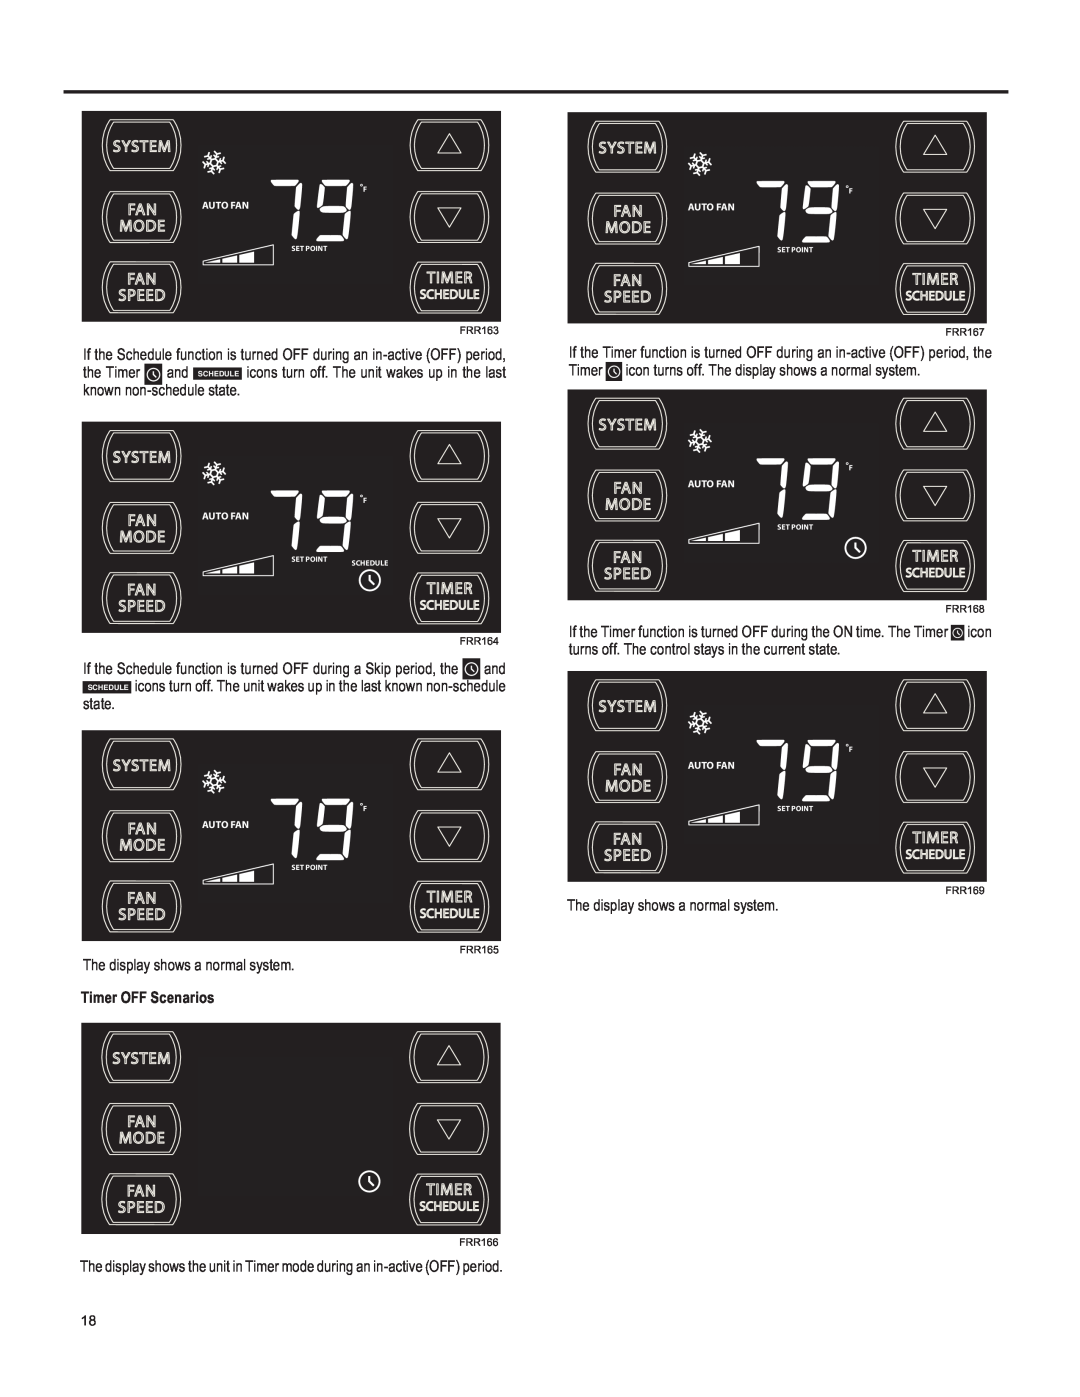 Friedrich SQ05, SQ10, SQ06, SQ08 operation manual state, The display shows a normal system, Timer OFF Scenarios 